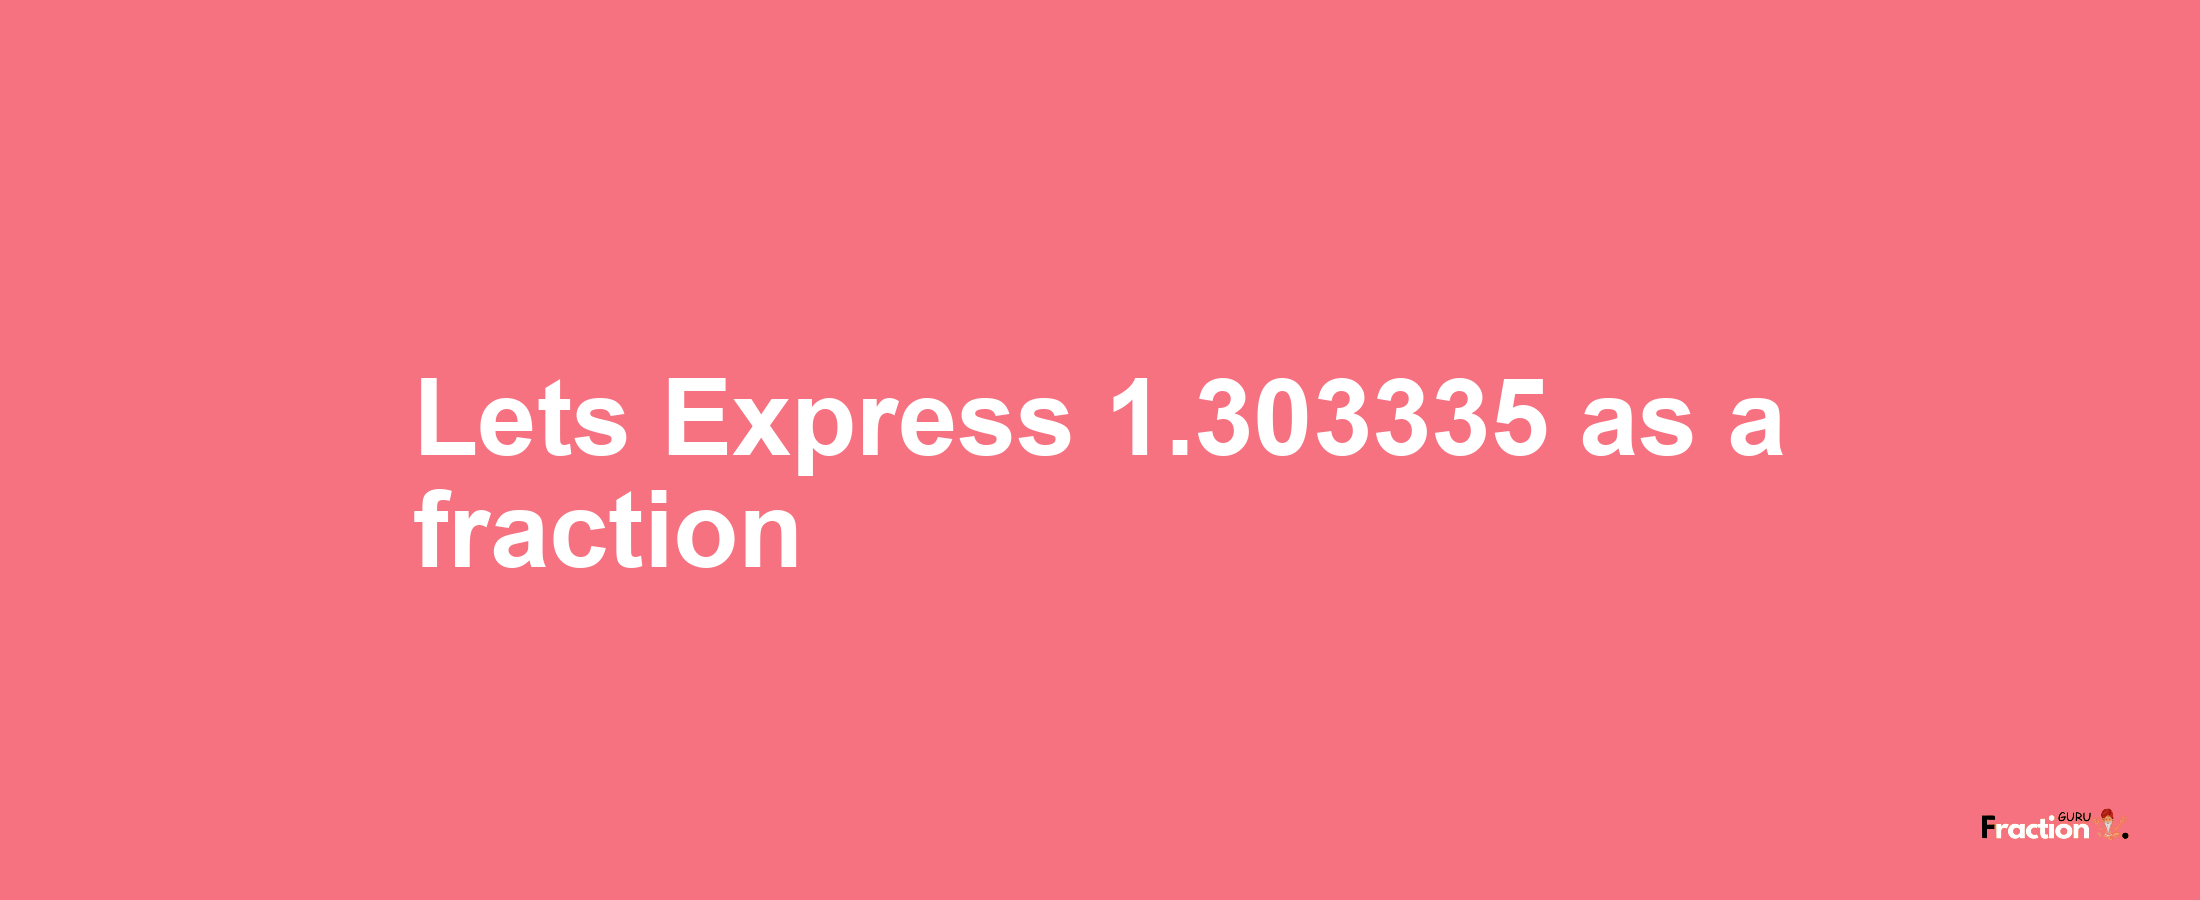 Lets Express 1.303335 as afraction